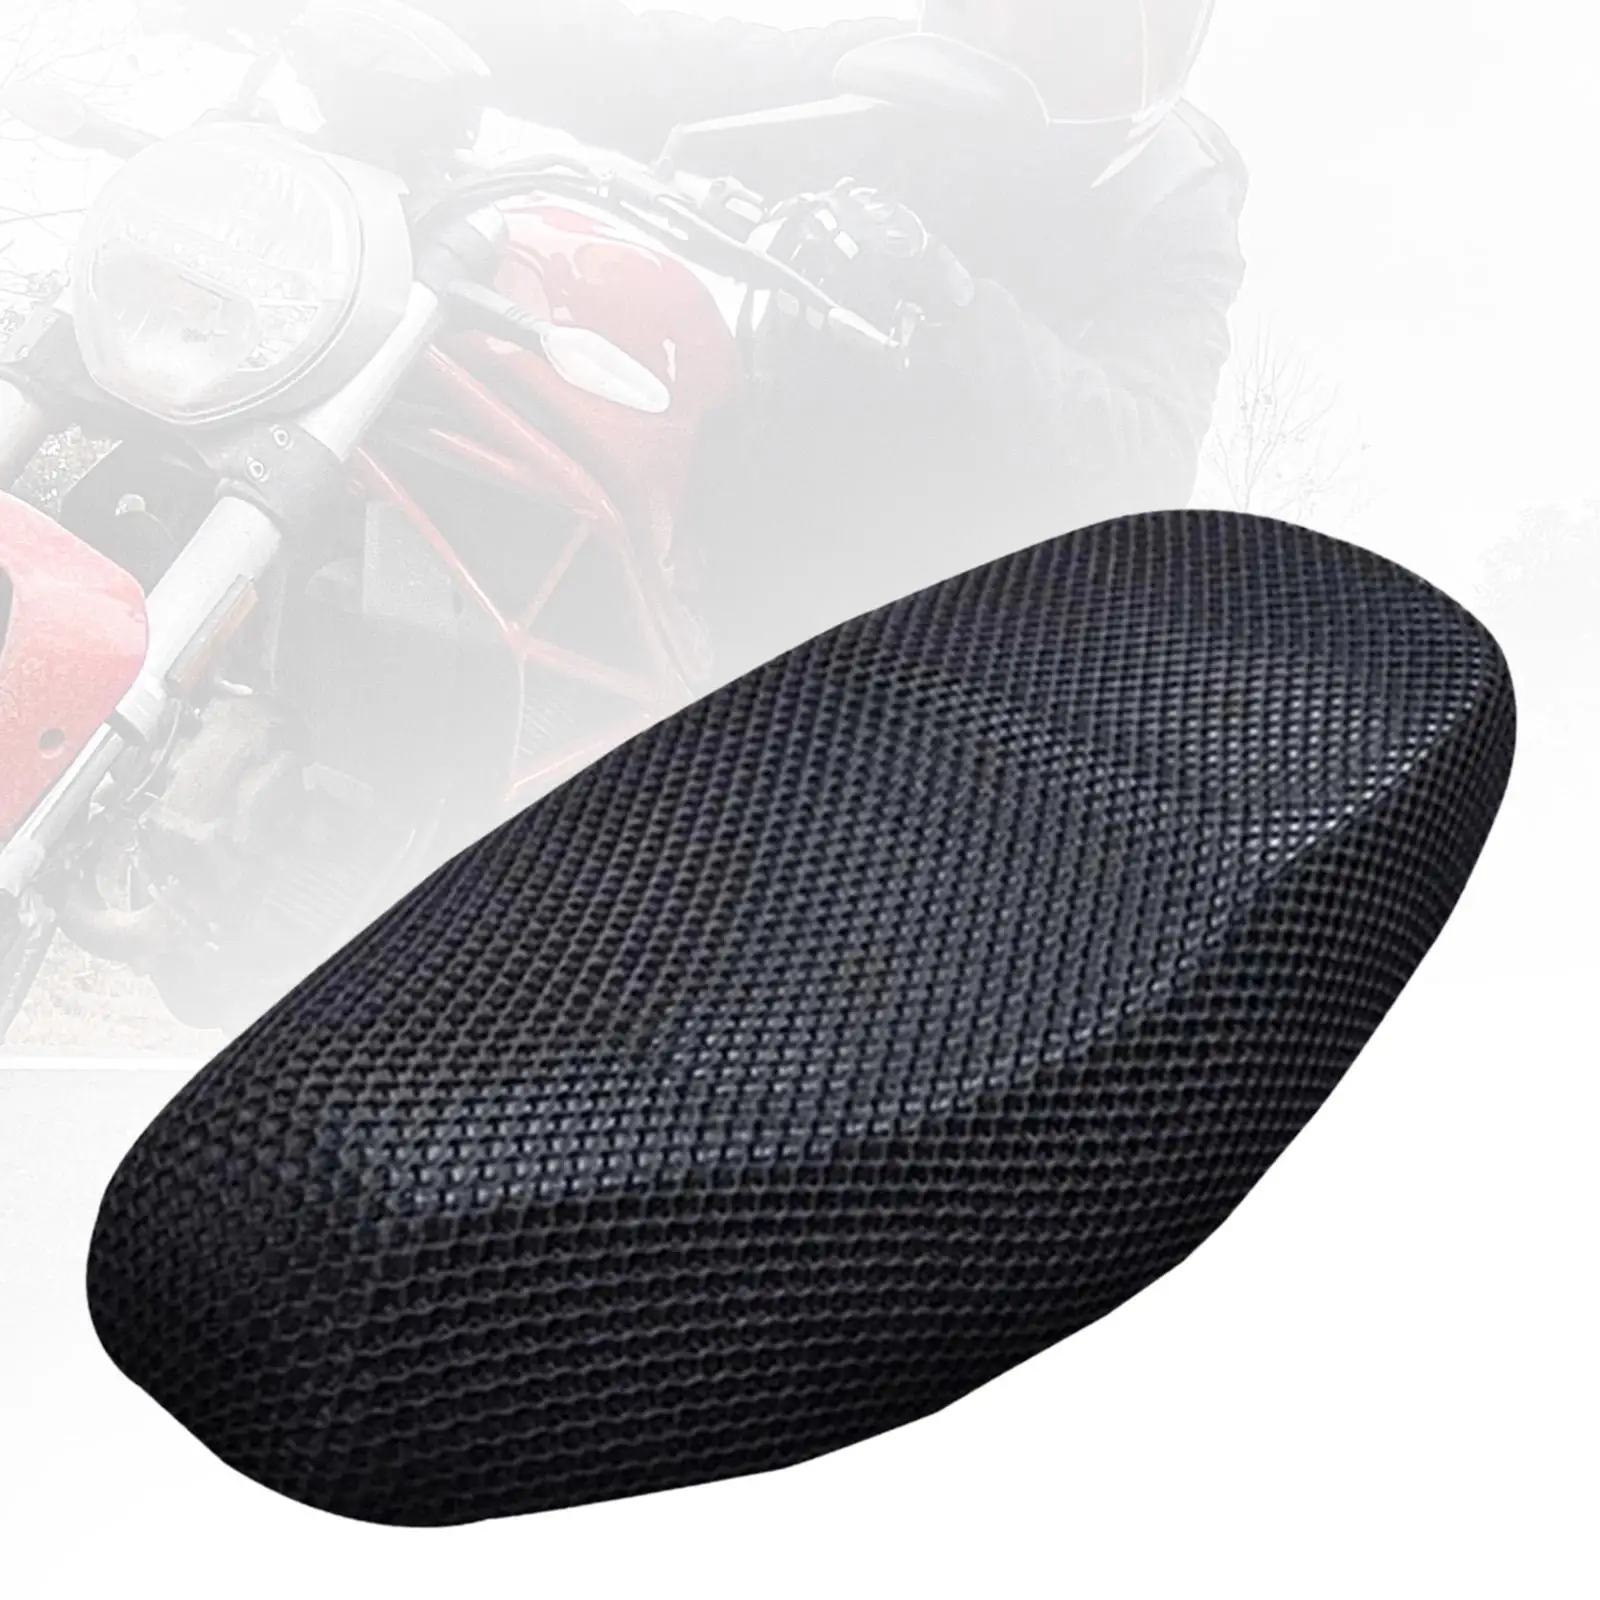 Motorcycle Seat Mesh Cover Anti Slip Replacement Universal 3D Fittings Thicken Universal Protector Motorbike Seat Cushion Cover